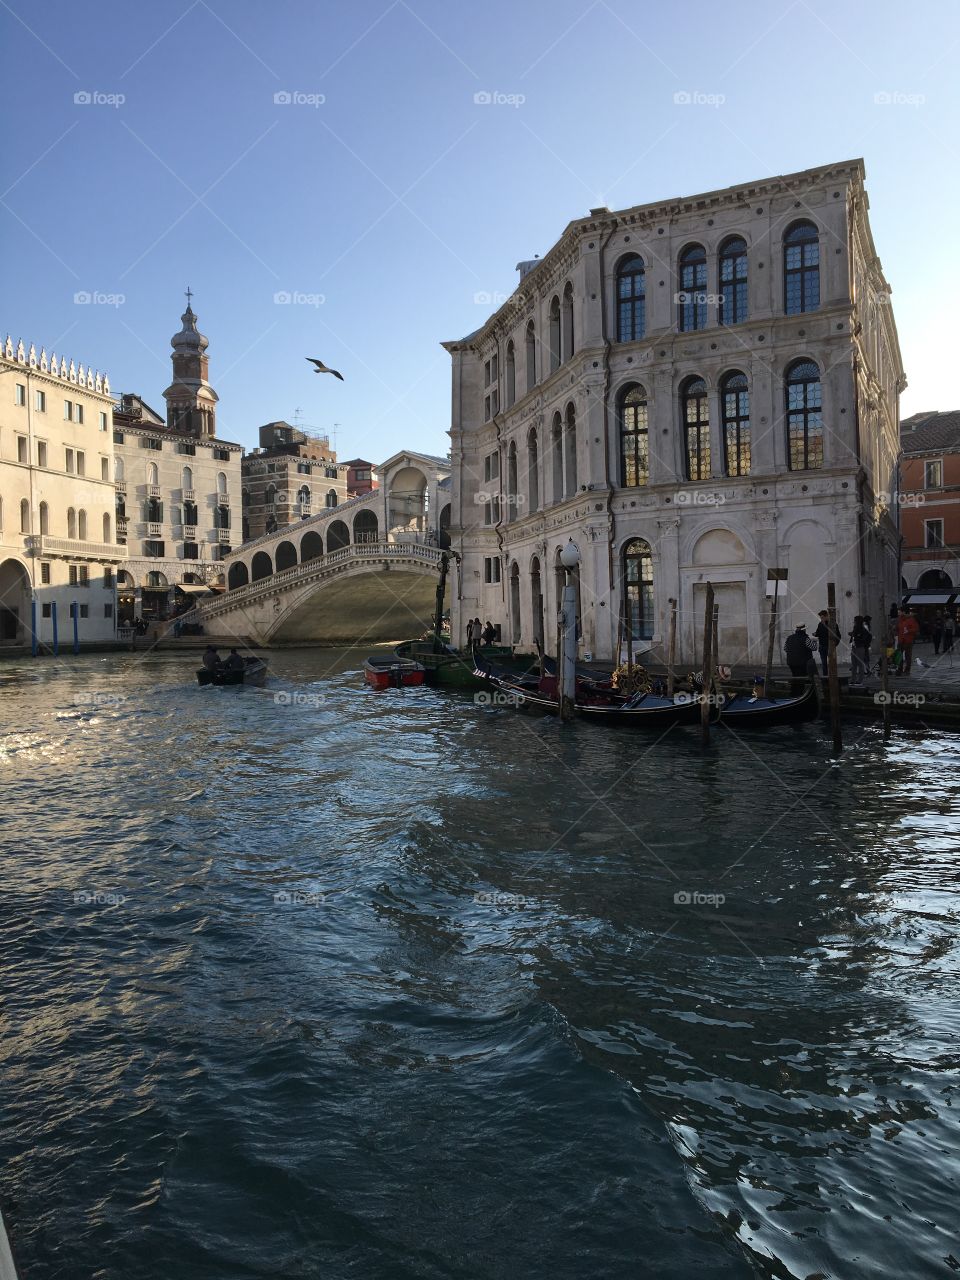 Canal, Architecture, Water, Travel, Building